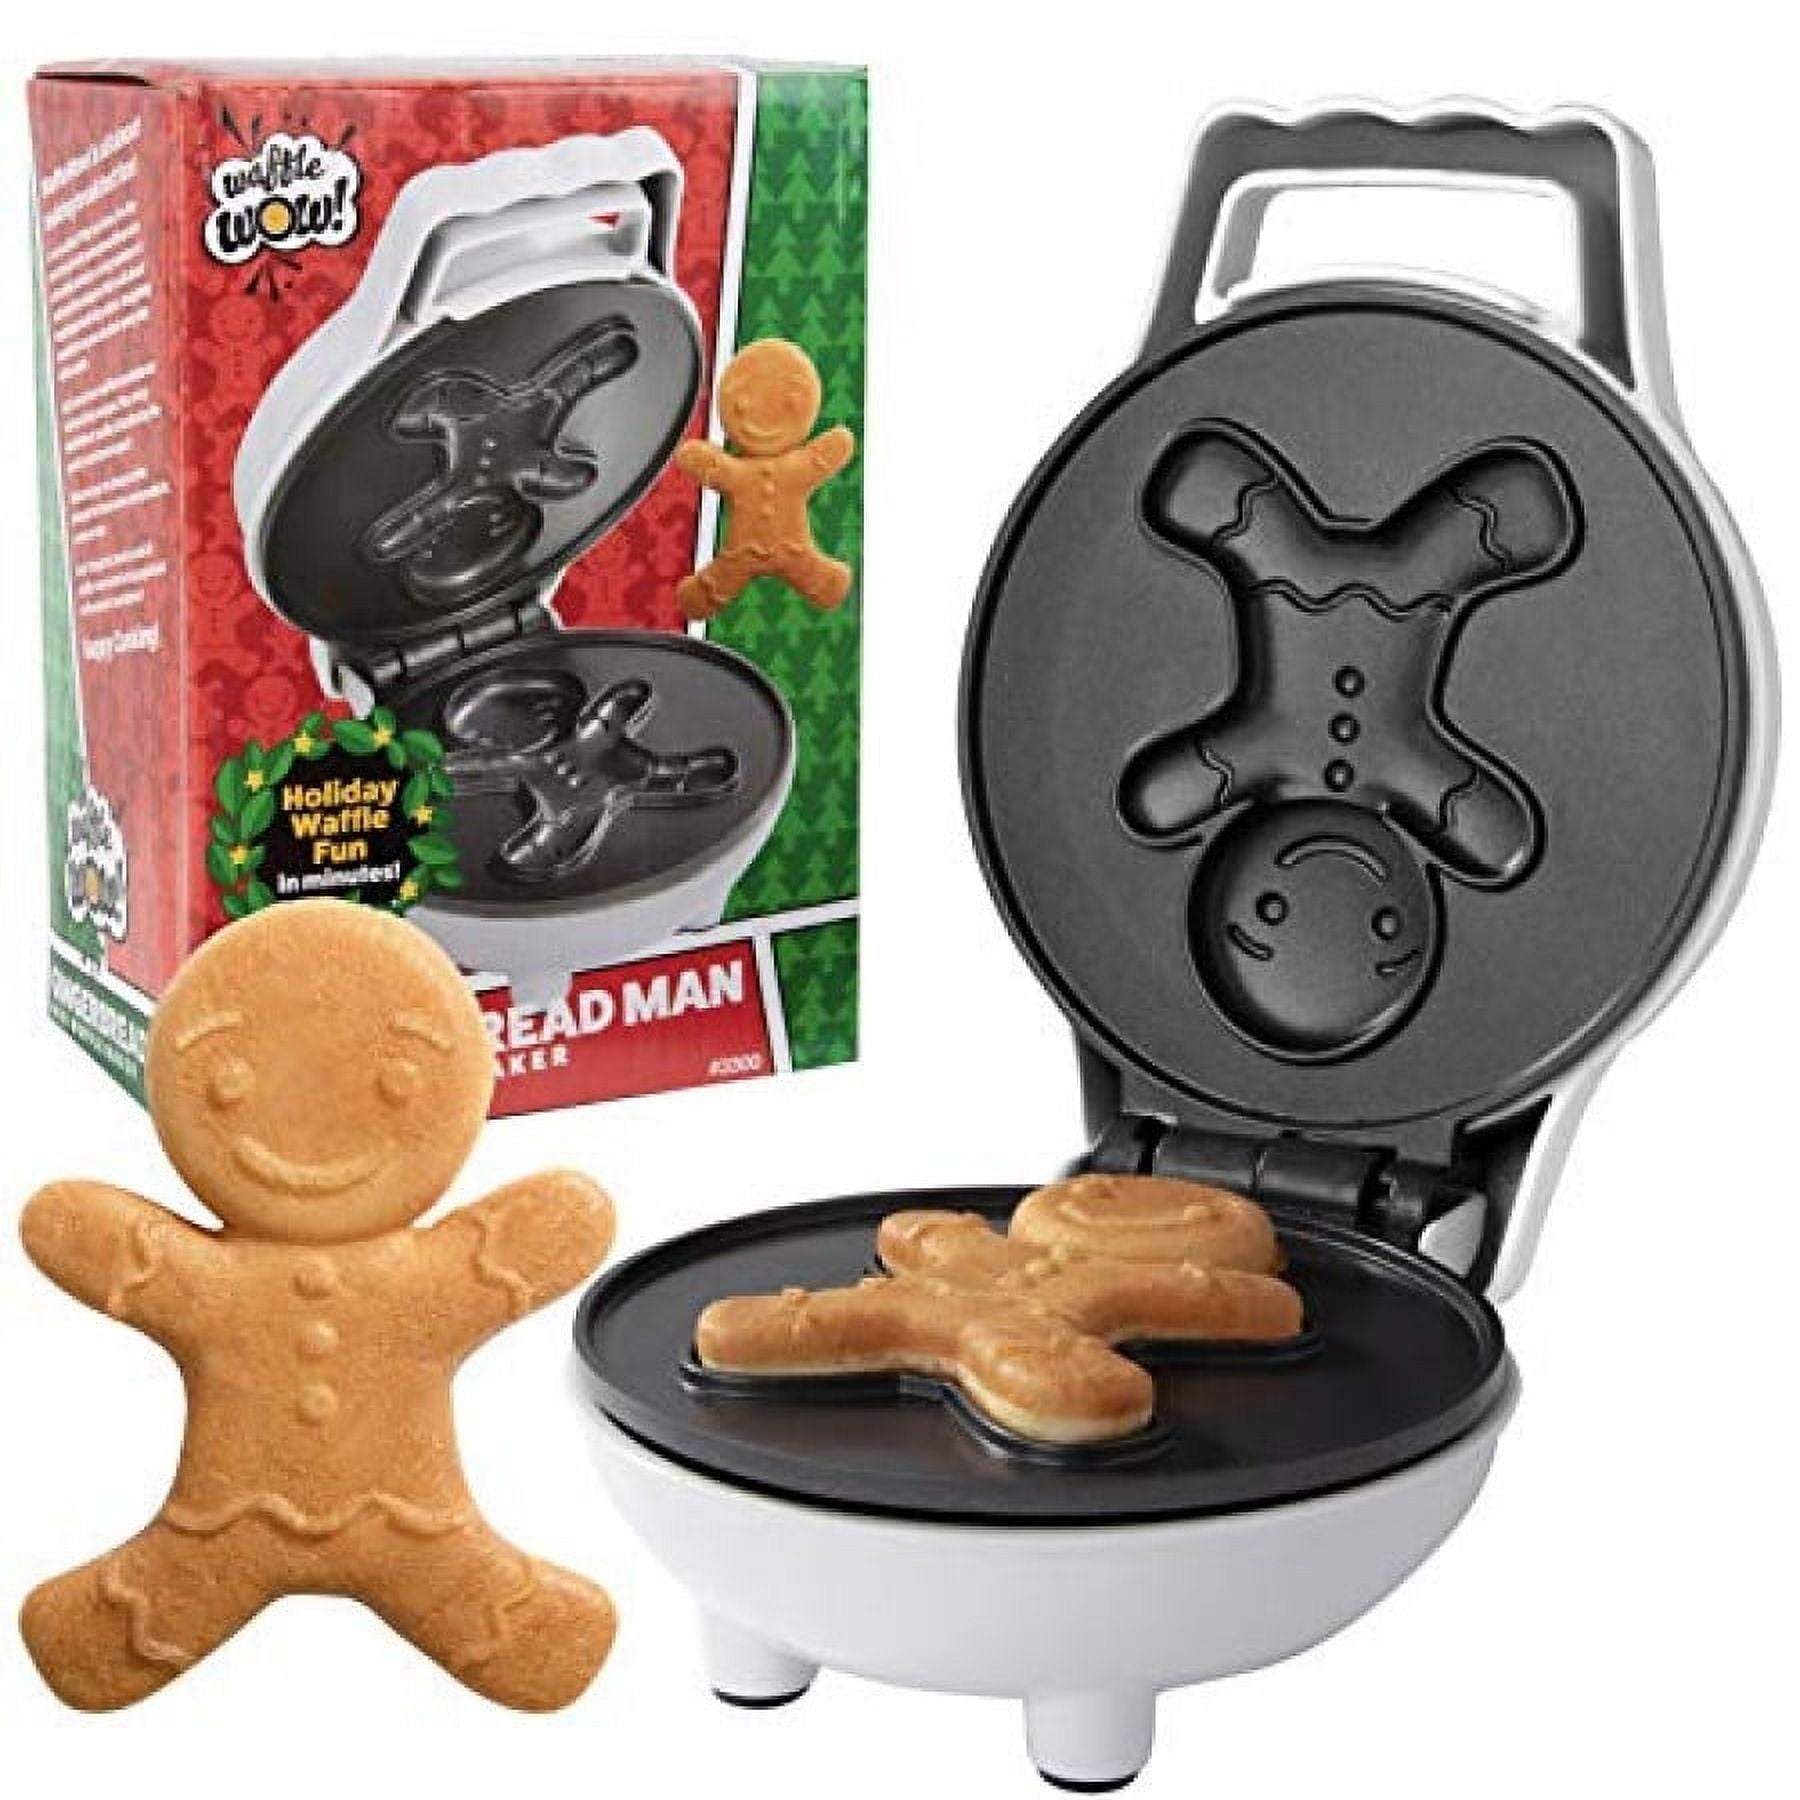 Cucina Pro Gingerbread Man Mini Waffle Maker - Make this Christmas Special  for Kids with Cute 4 Inch Waffler Iron, Electric Non Stick